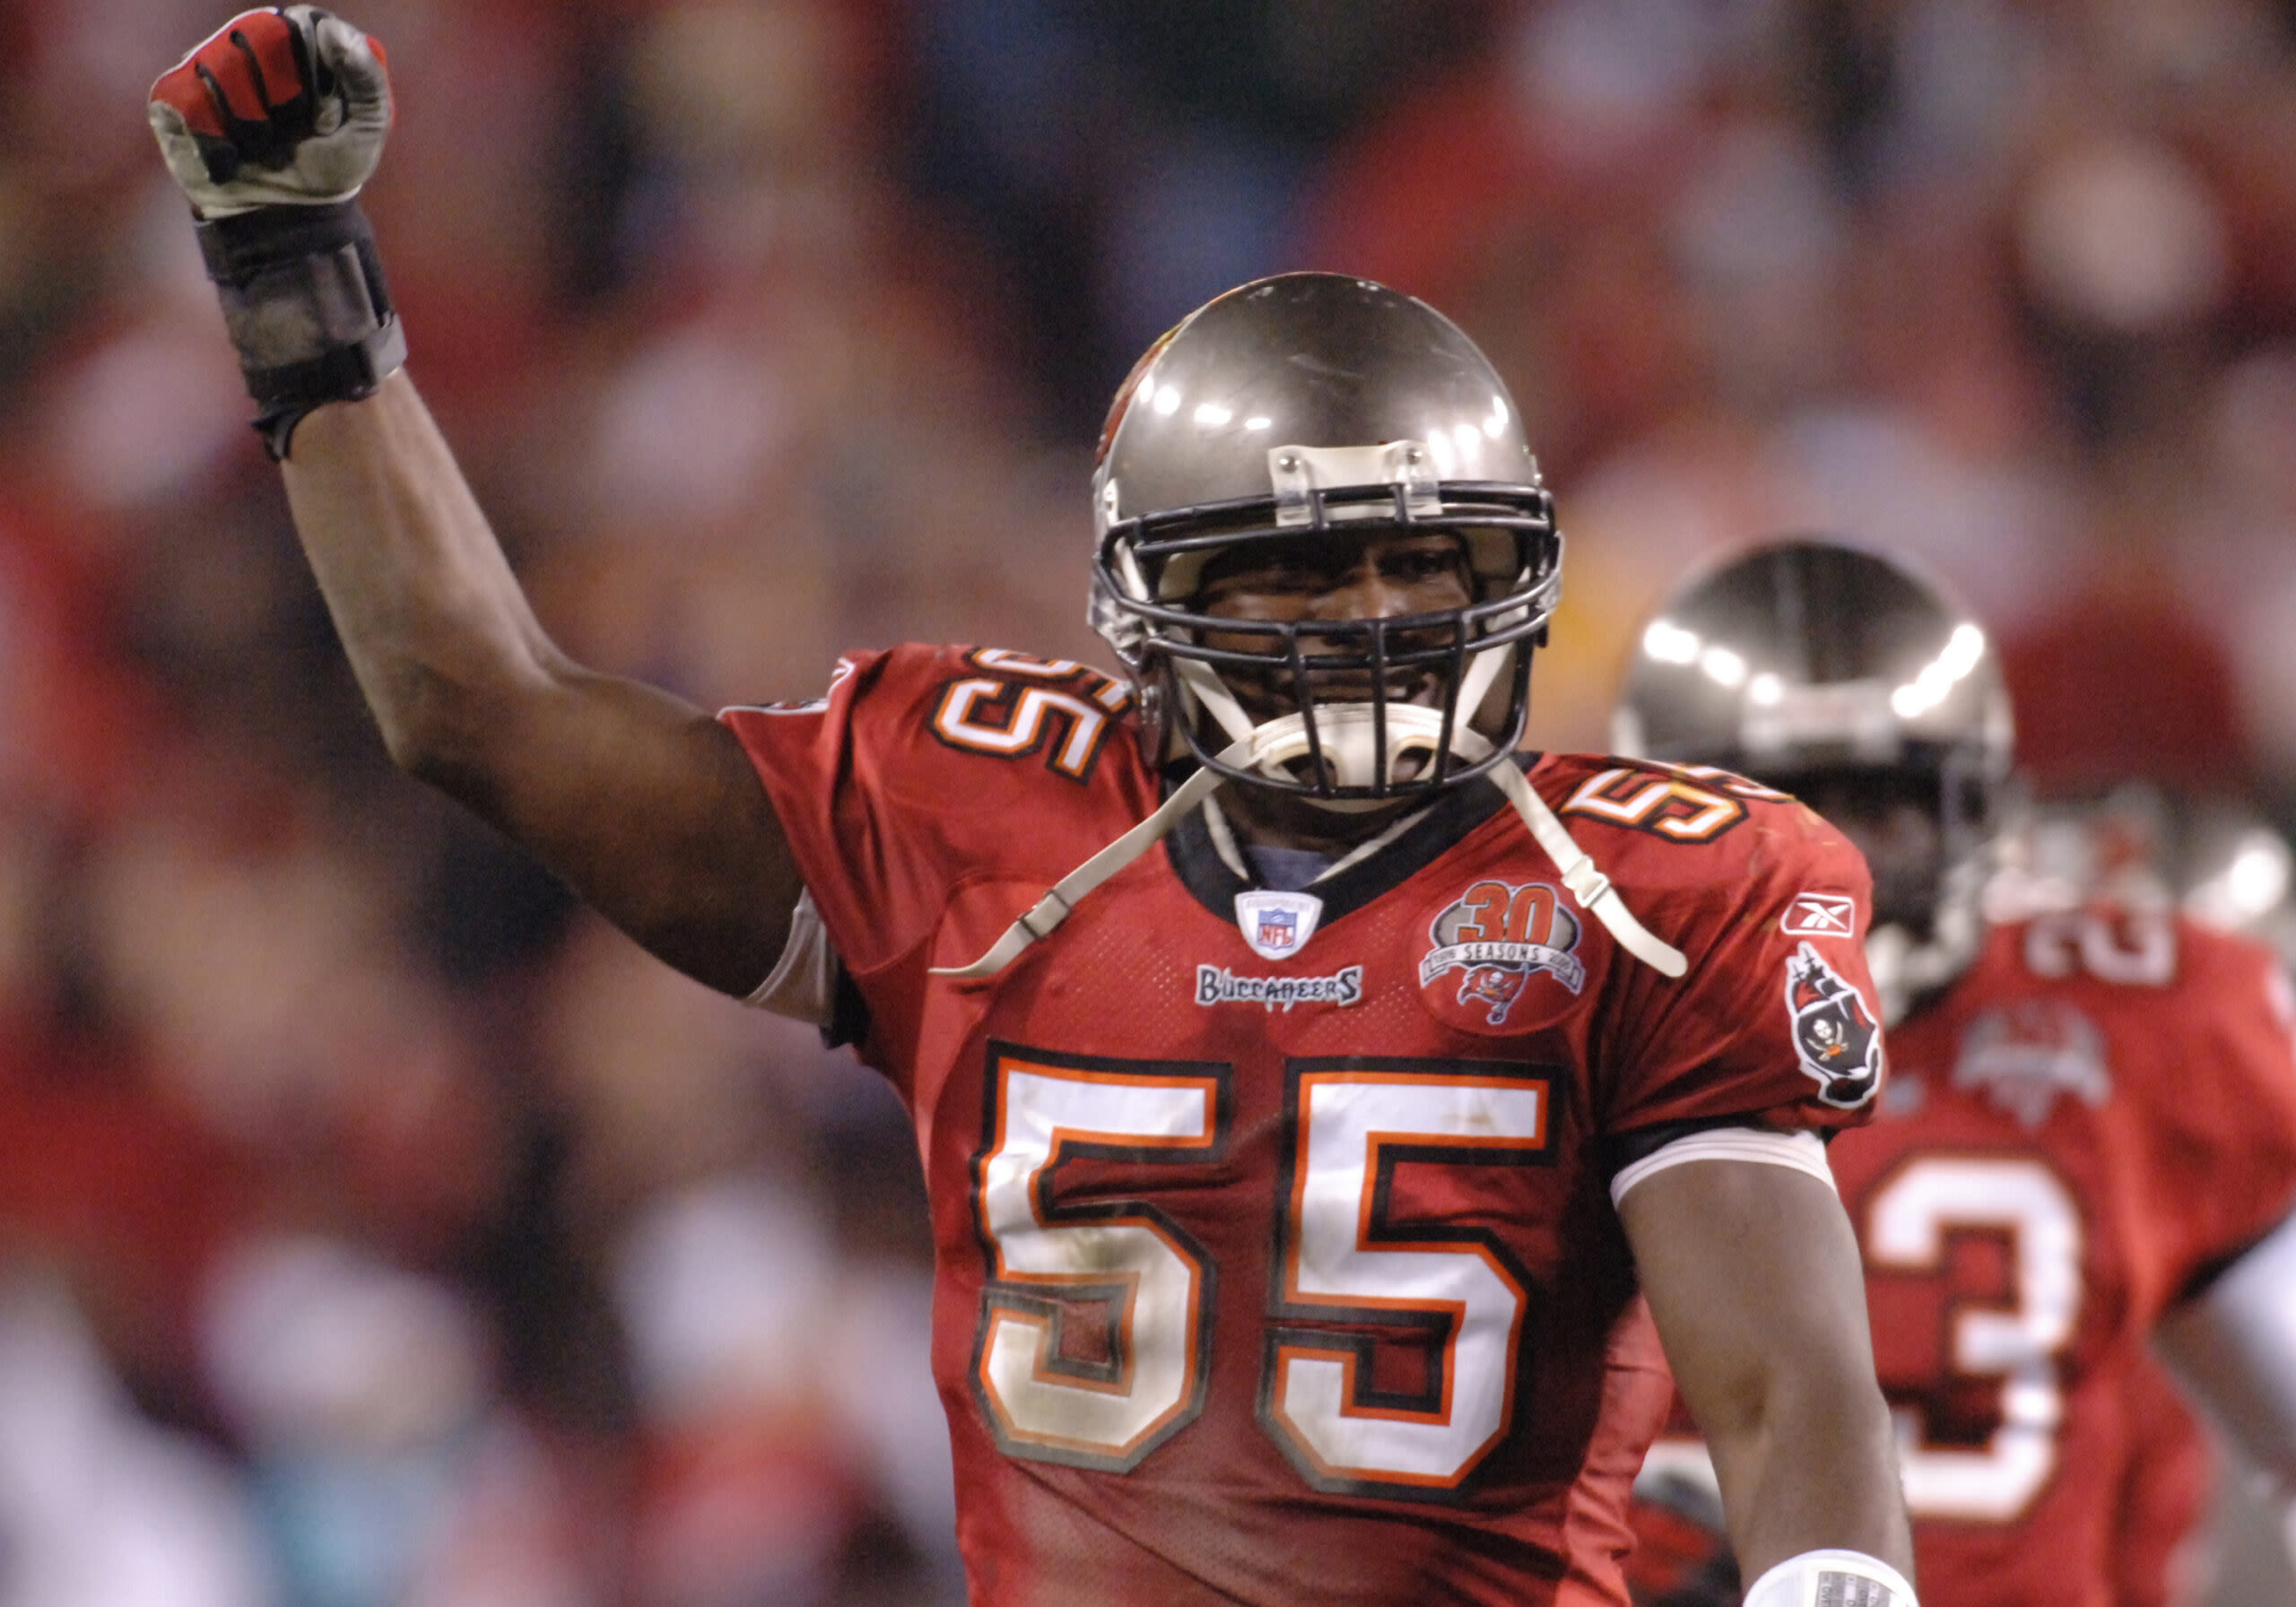 Who’s your favorite player? Mr. Derrick Brooks